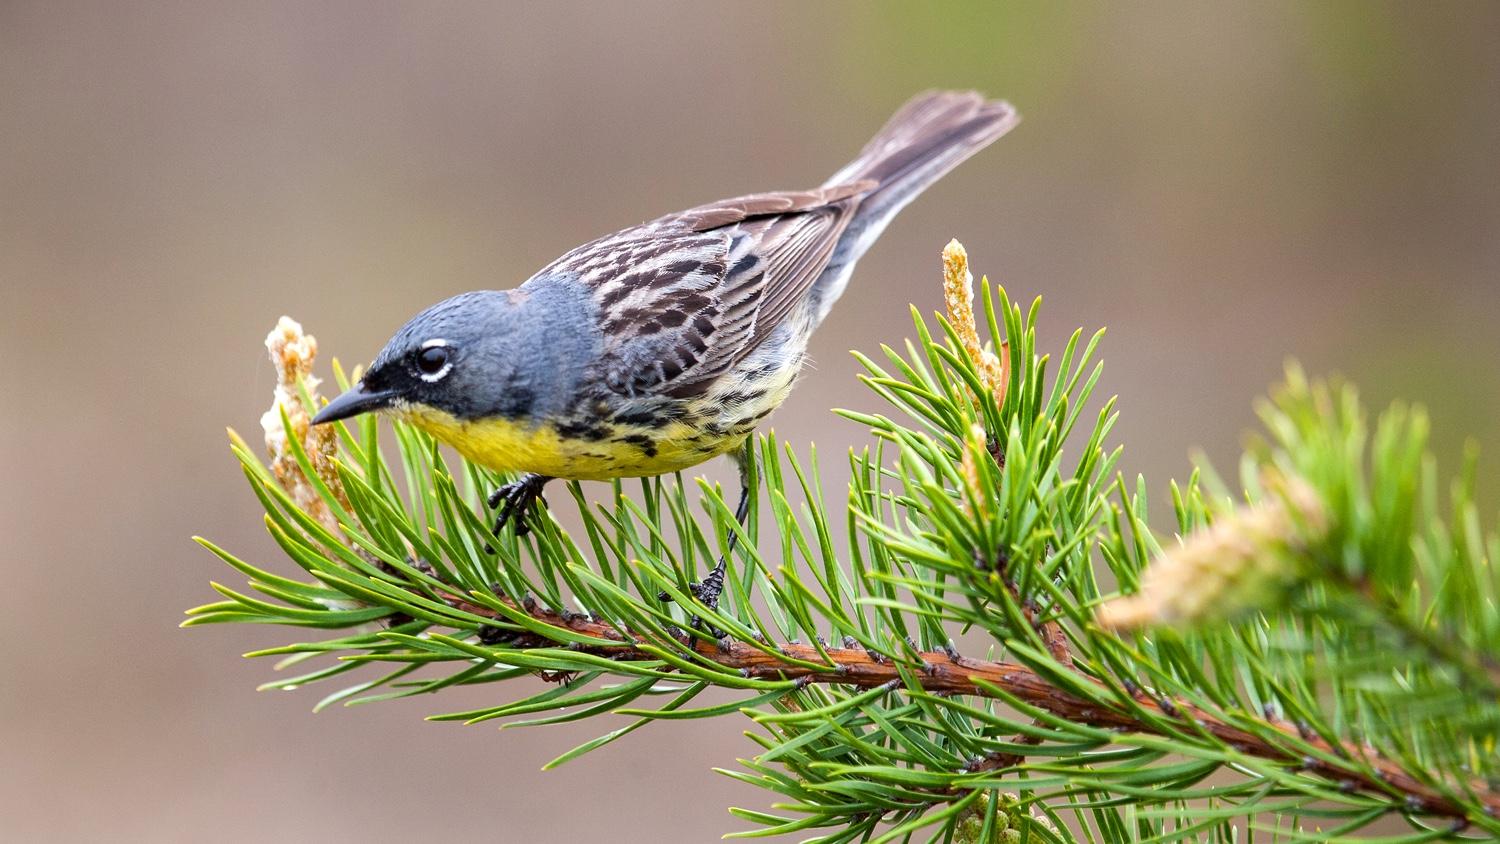 The rarity of the Kirtland's warbler and its highly specific habitat choice for breeding in northern Michigan made it an ideal choice for research. (Courtesy of Nathan Cooper)